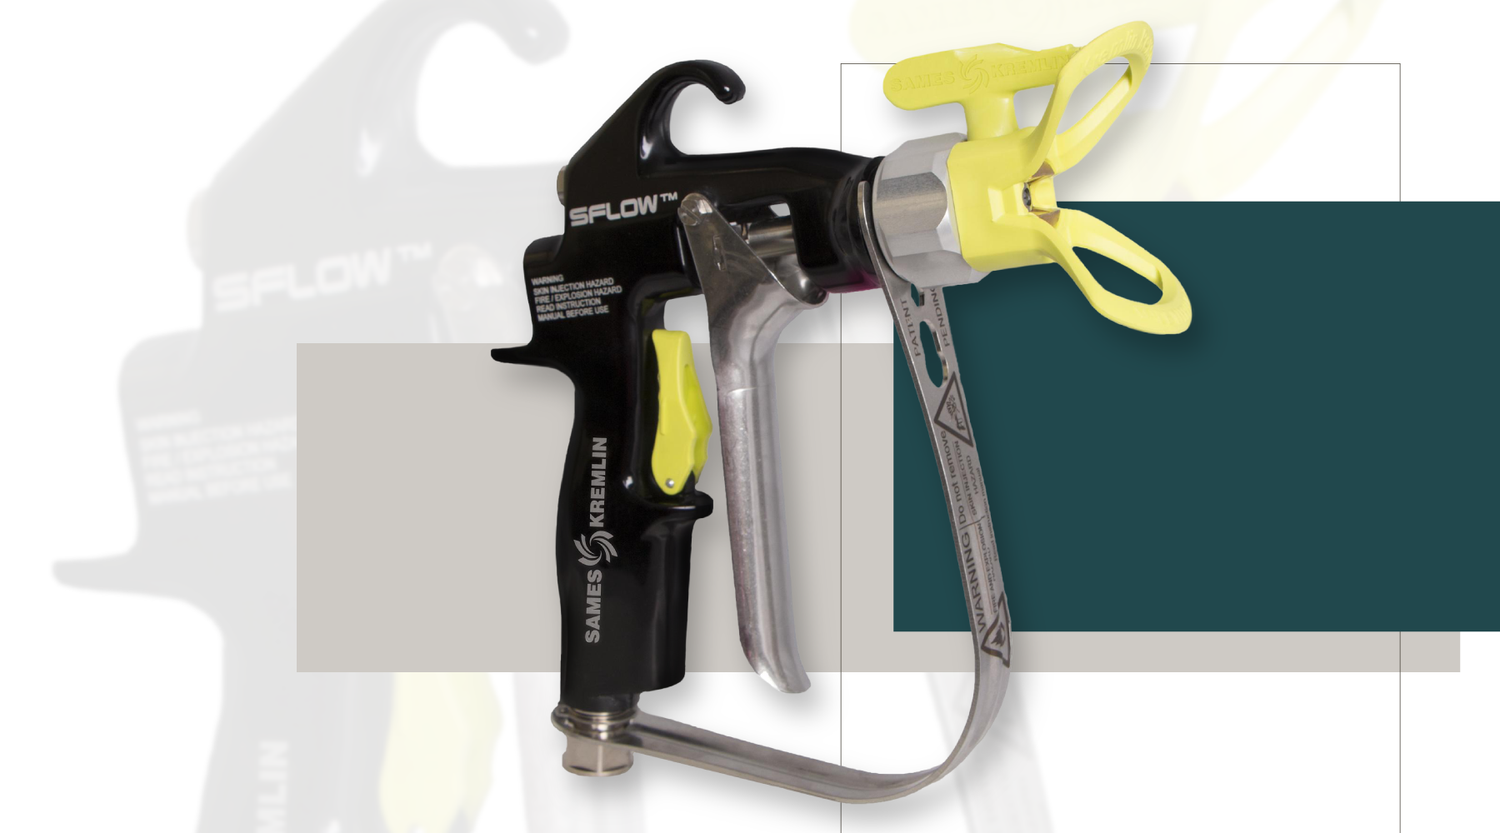 We Have the Wood Stain Spray Gun You Need